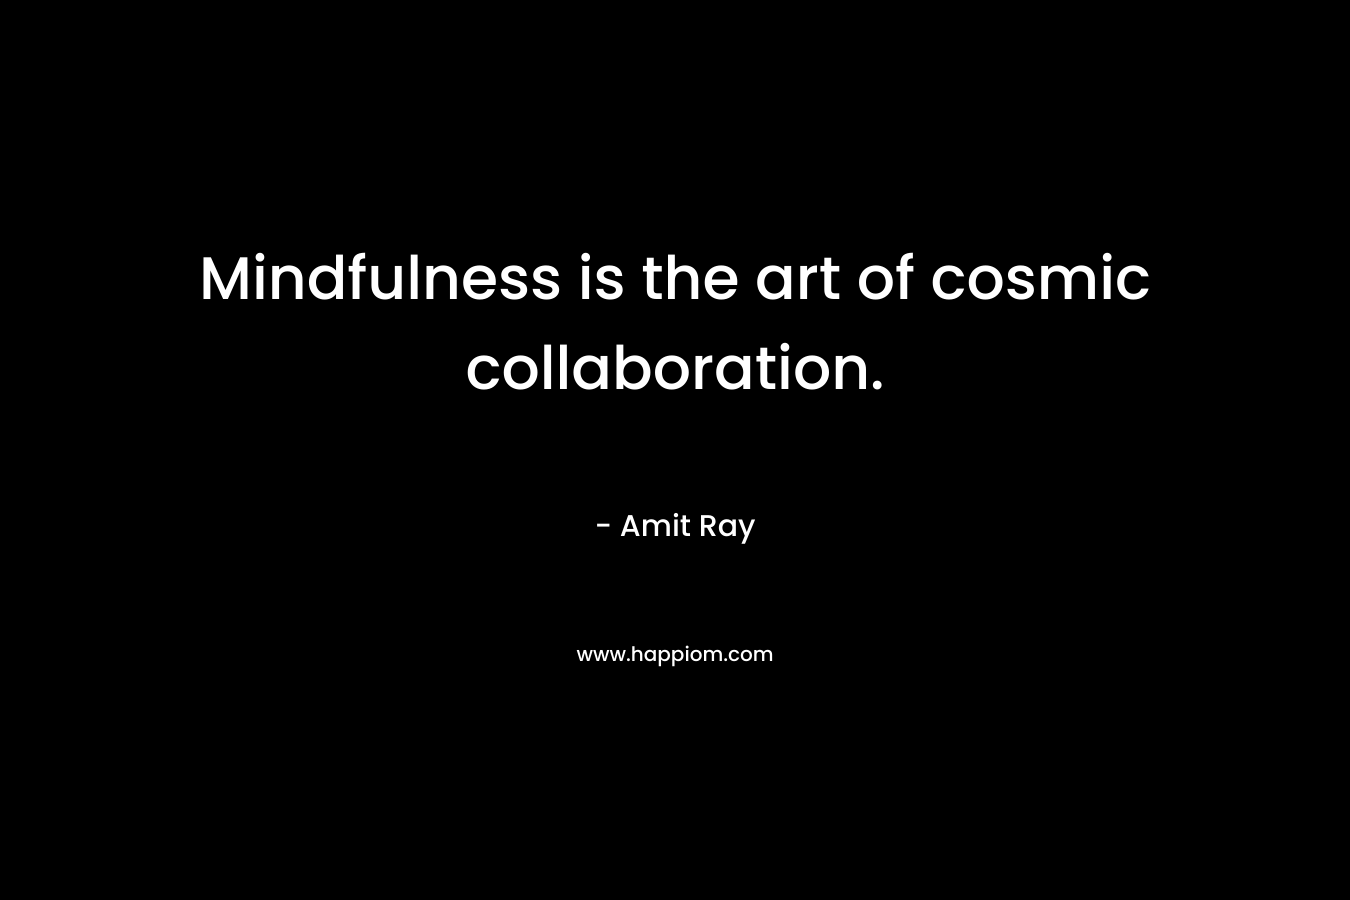 Mindfulness is the art of cosmic collaboration.